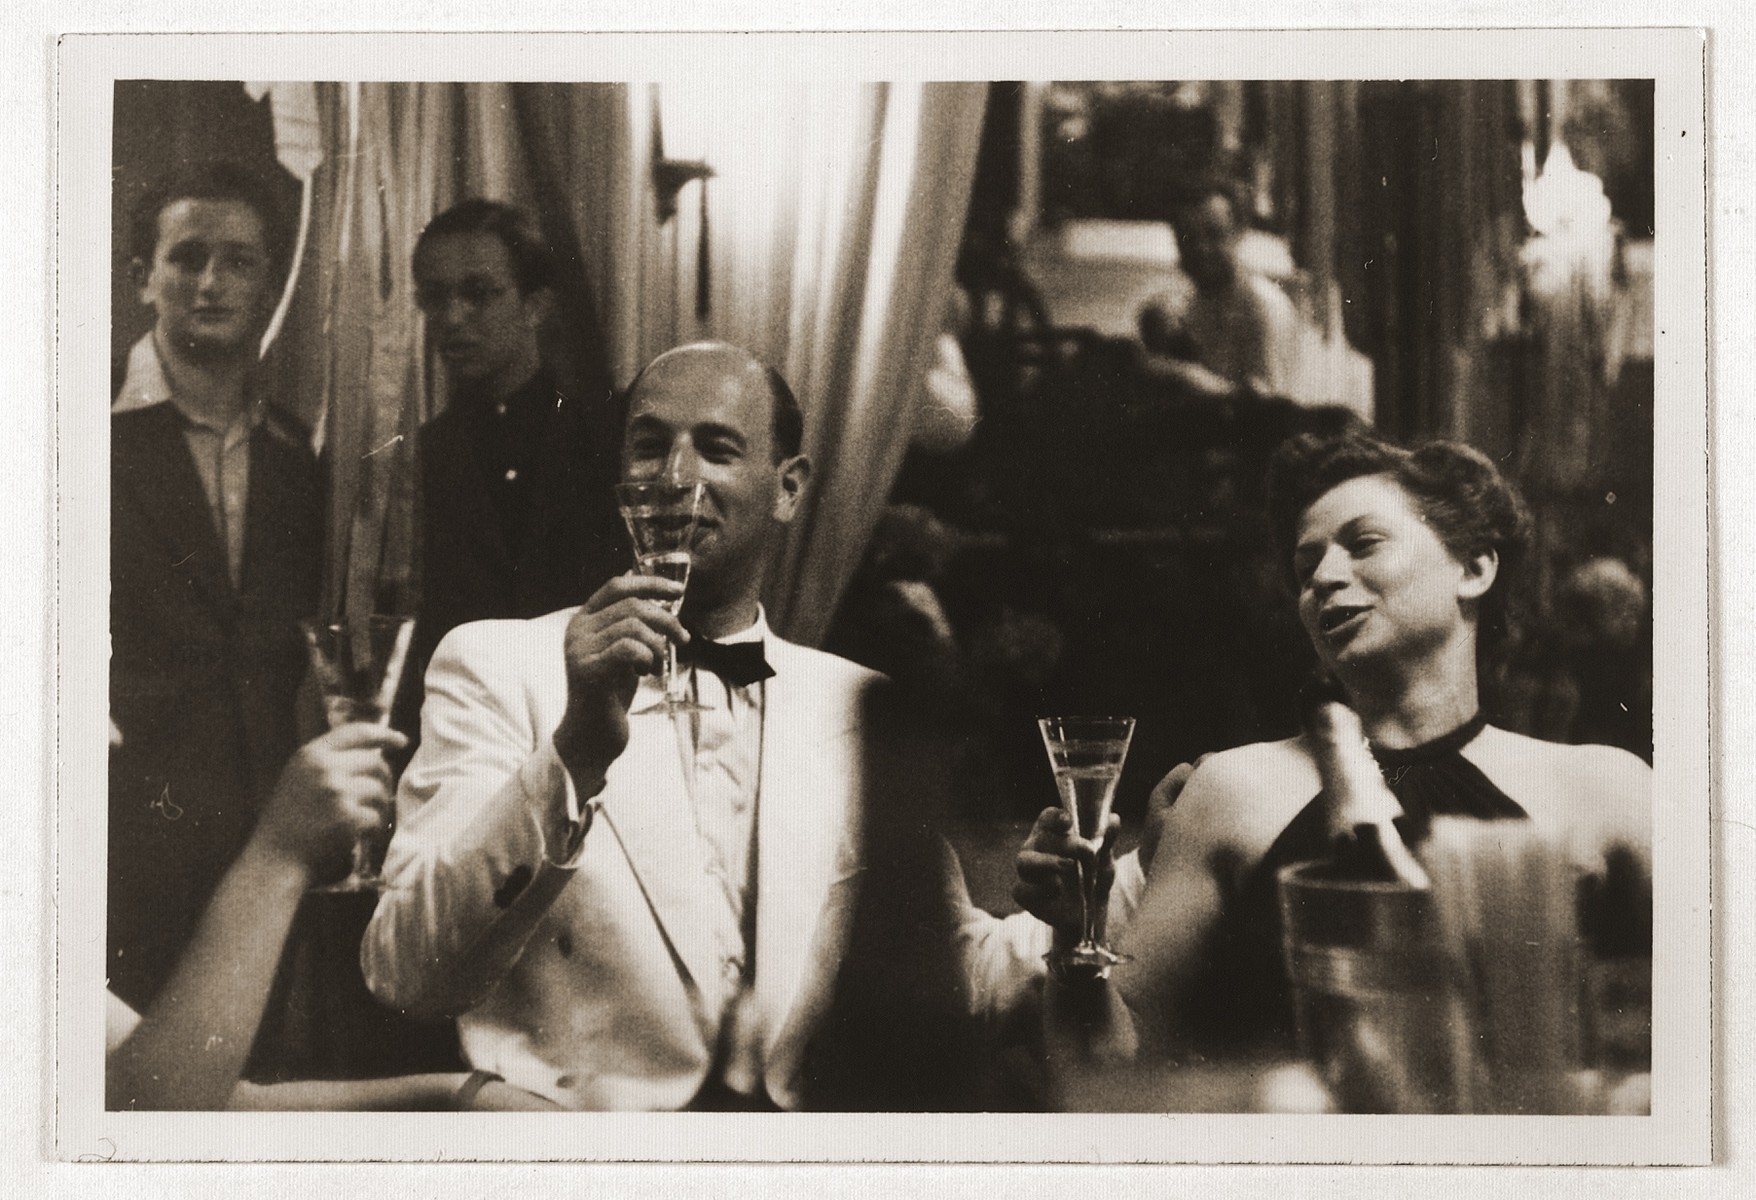 A couple in evening dress raise their glasses in a toast, aboard the MS St. Louis.

Pictured are Kurt  Strauss and Kathe Jellinek.